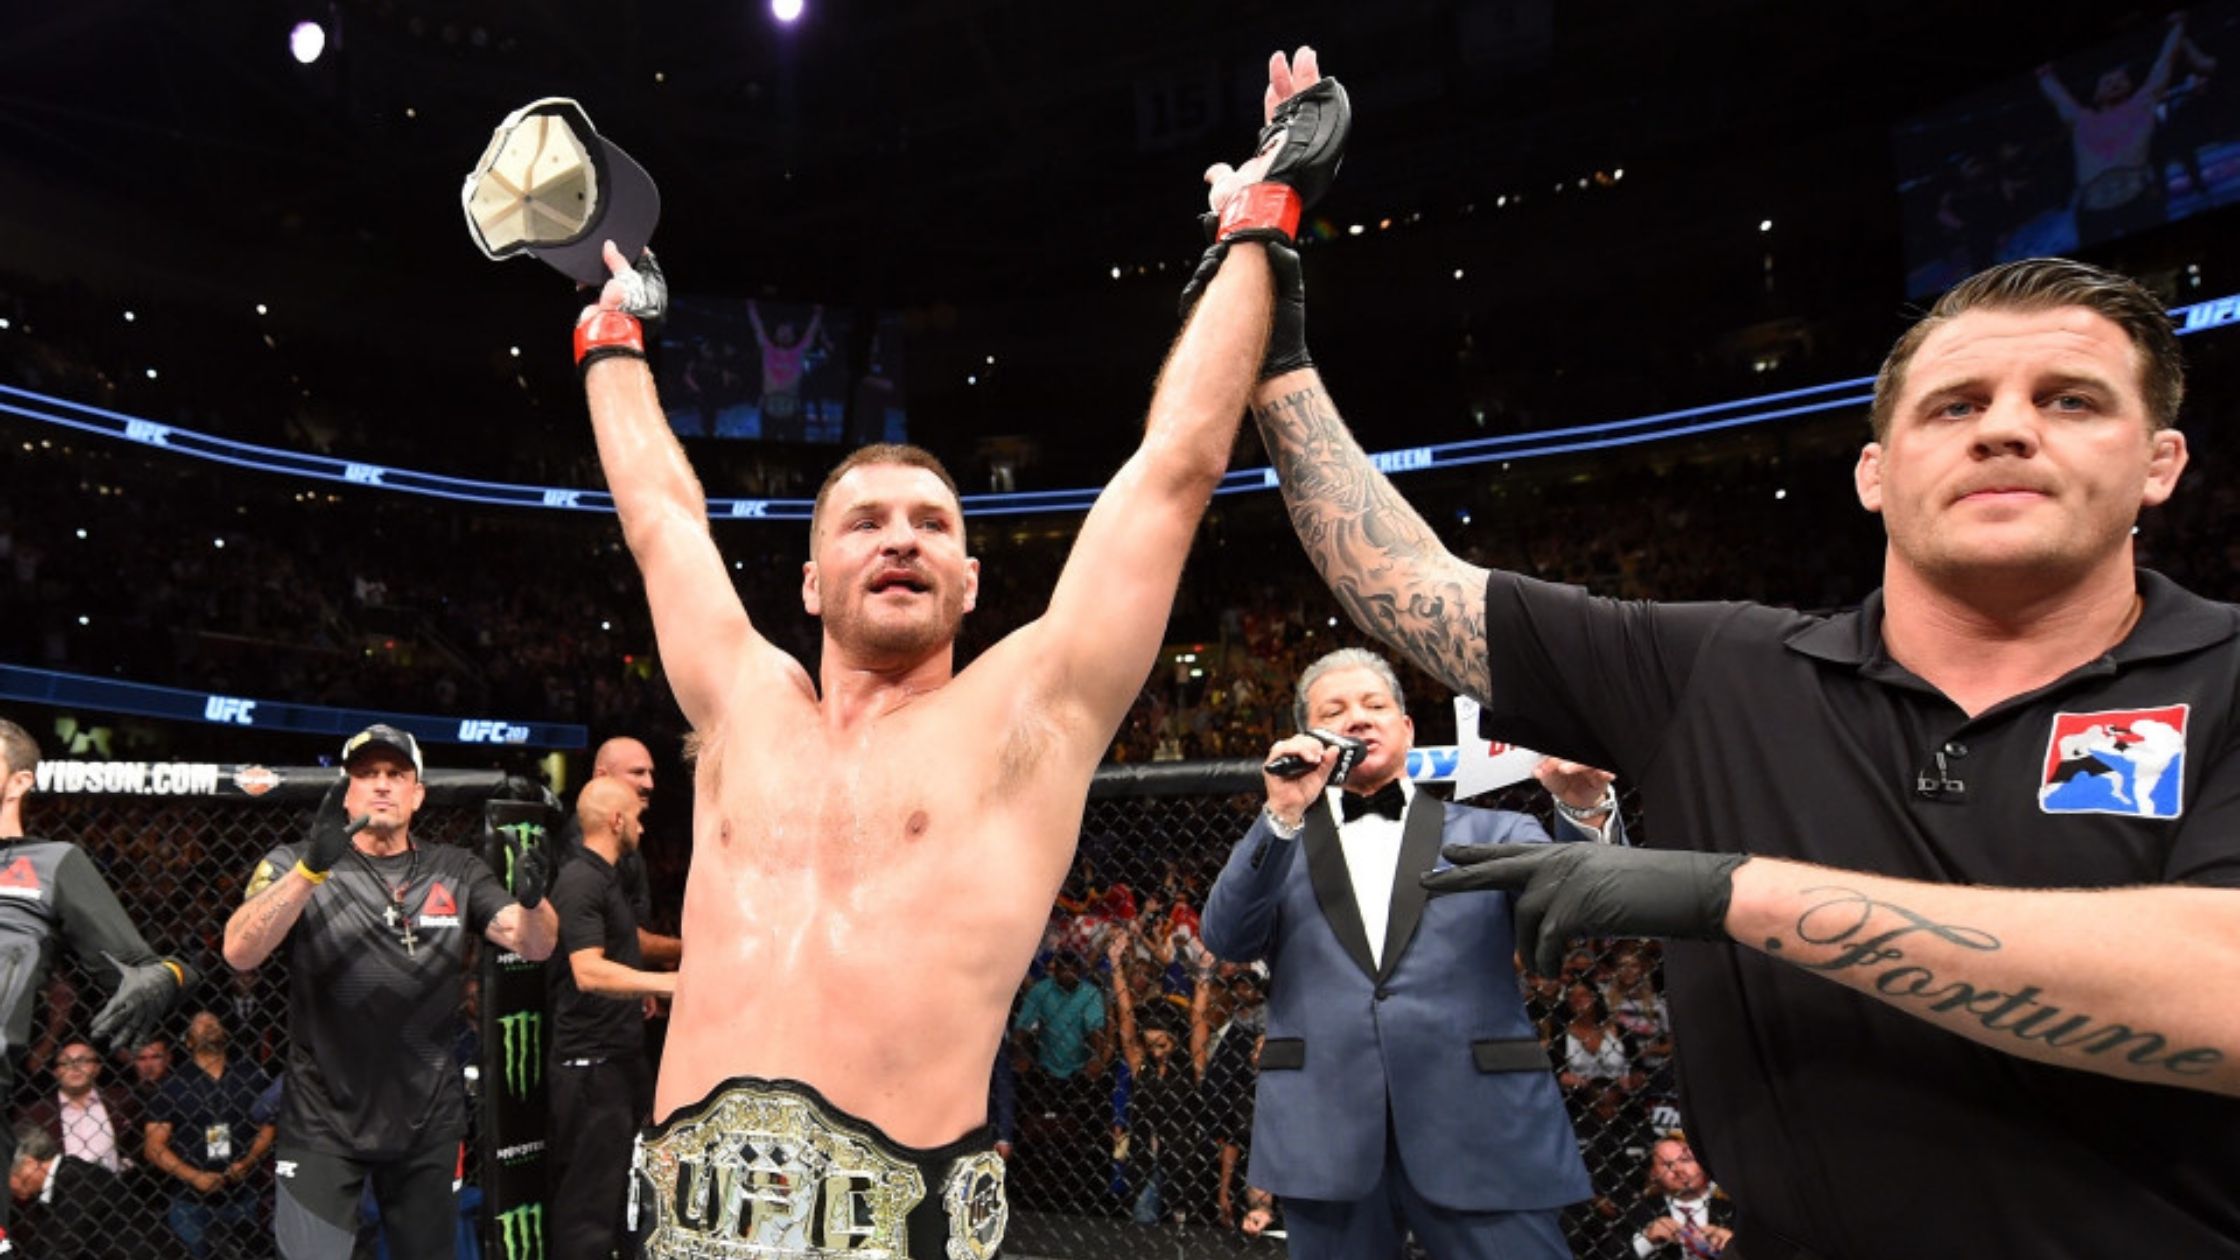 Stipe Miocic Bio, Wife, Net Worth, Height, Weight, Facts, Family